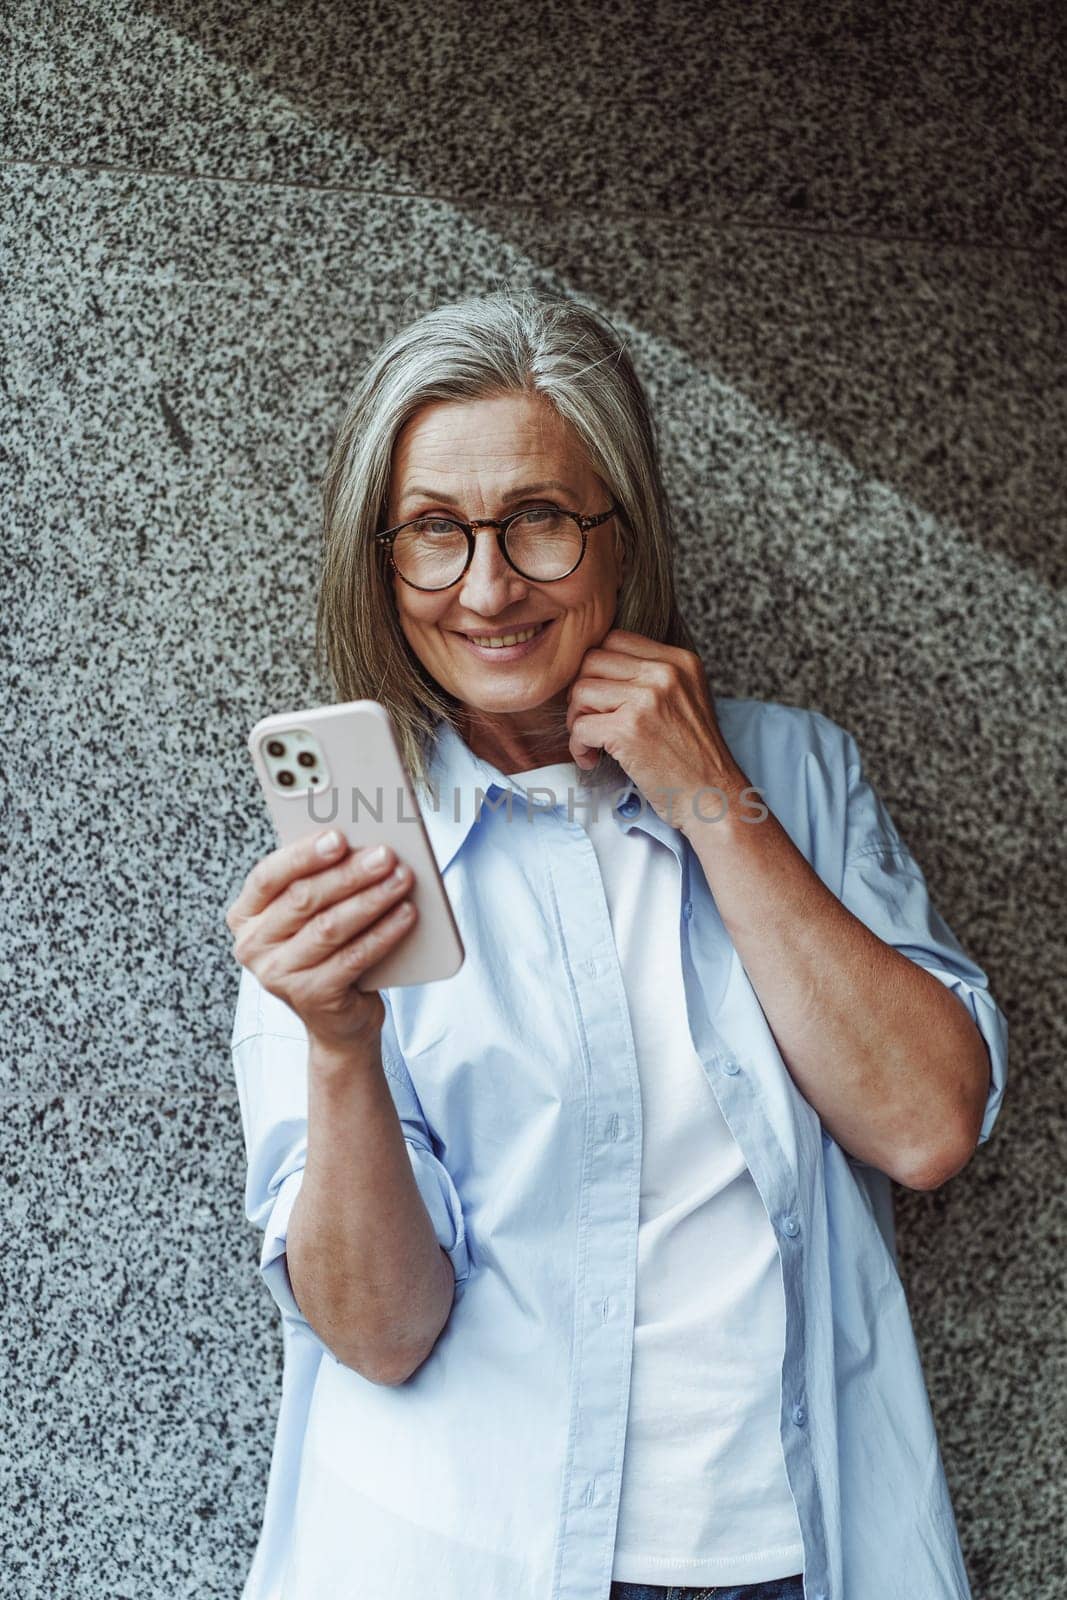 Concept of communication in old age, mature senior woman using mobile phone for texting and internet messengers. Woman's active engagement with technology and desire to stay connected in digital age. by LipikStockMedia